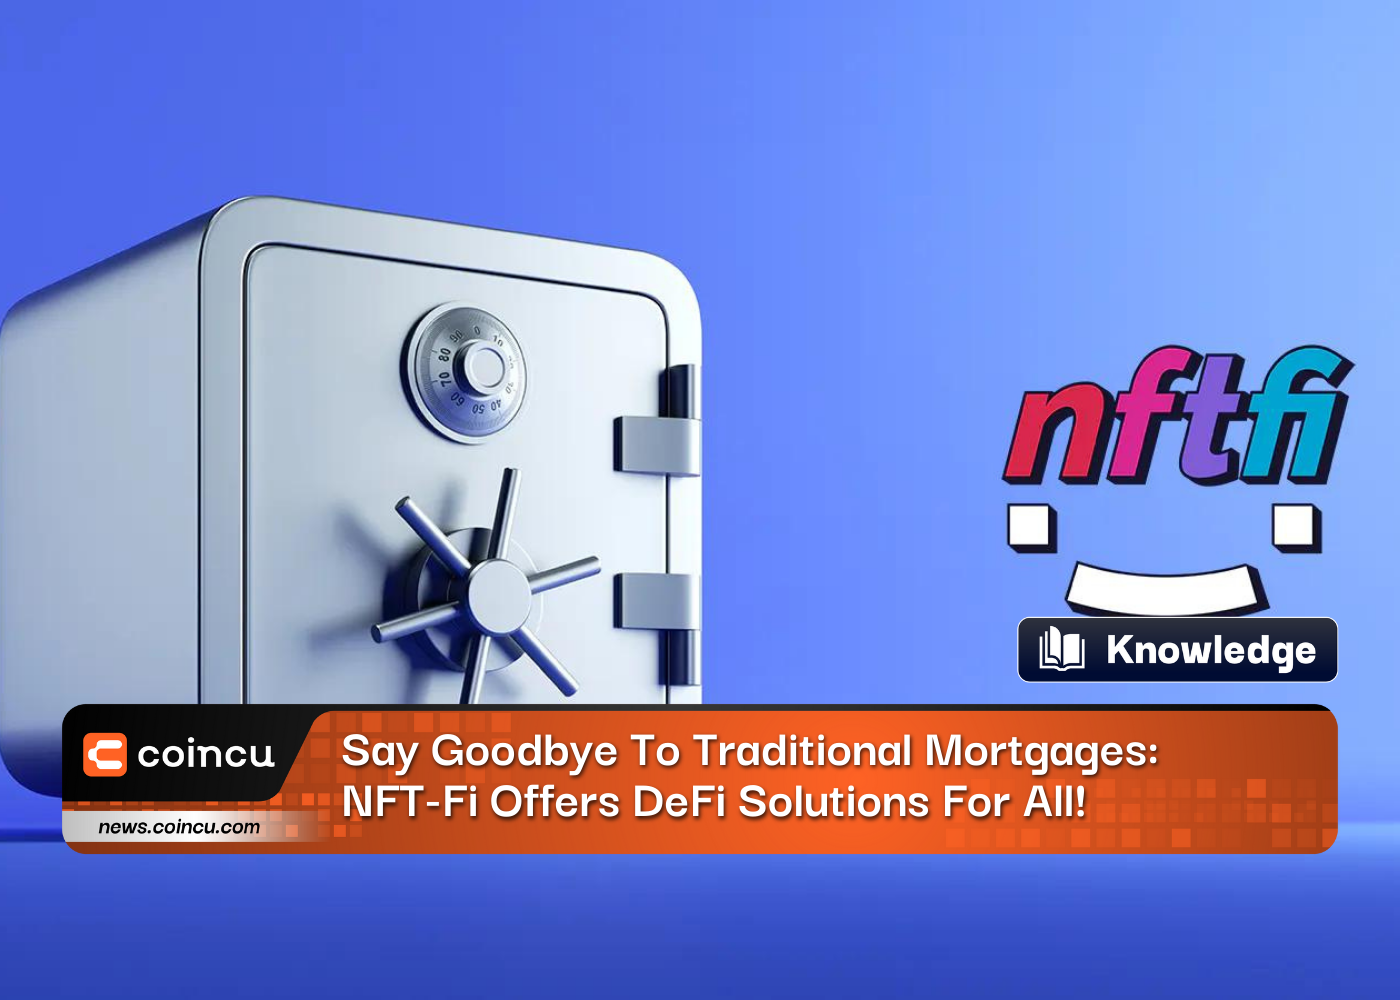 NFT Fi Offers DeFi Solutions For All